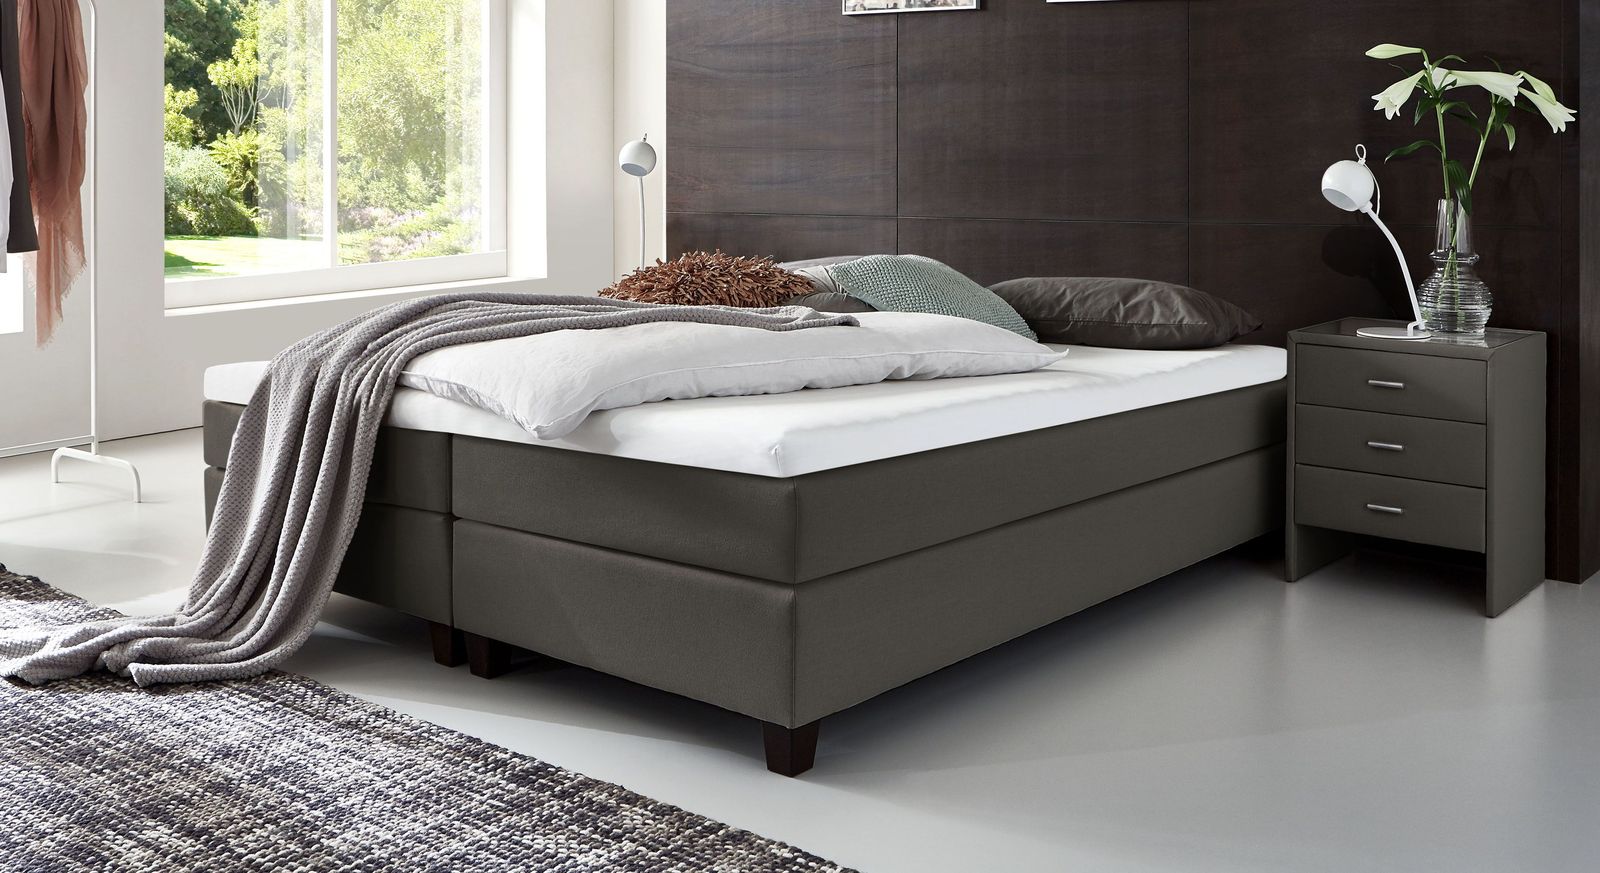 53 cm hohe Boxspringliege Luciano aus Webstoff in Anthrazit